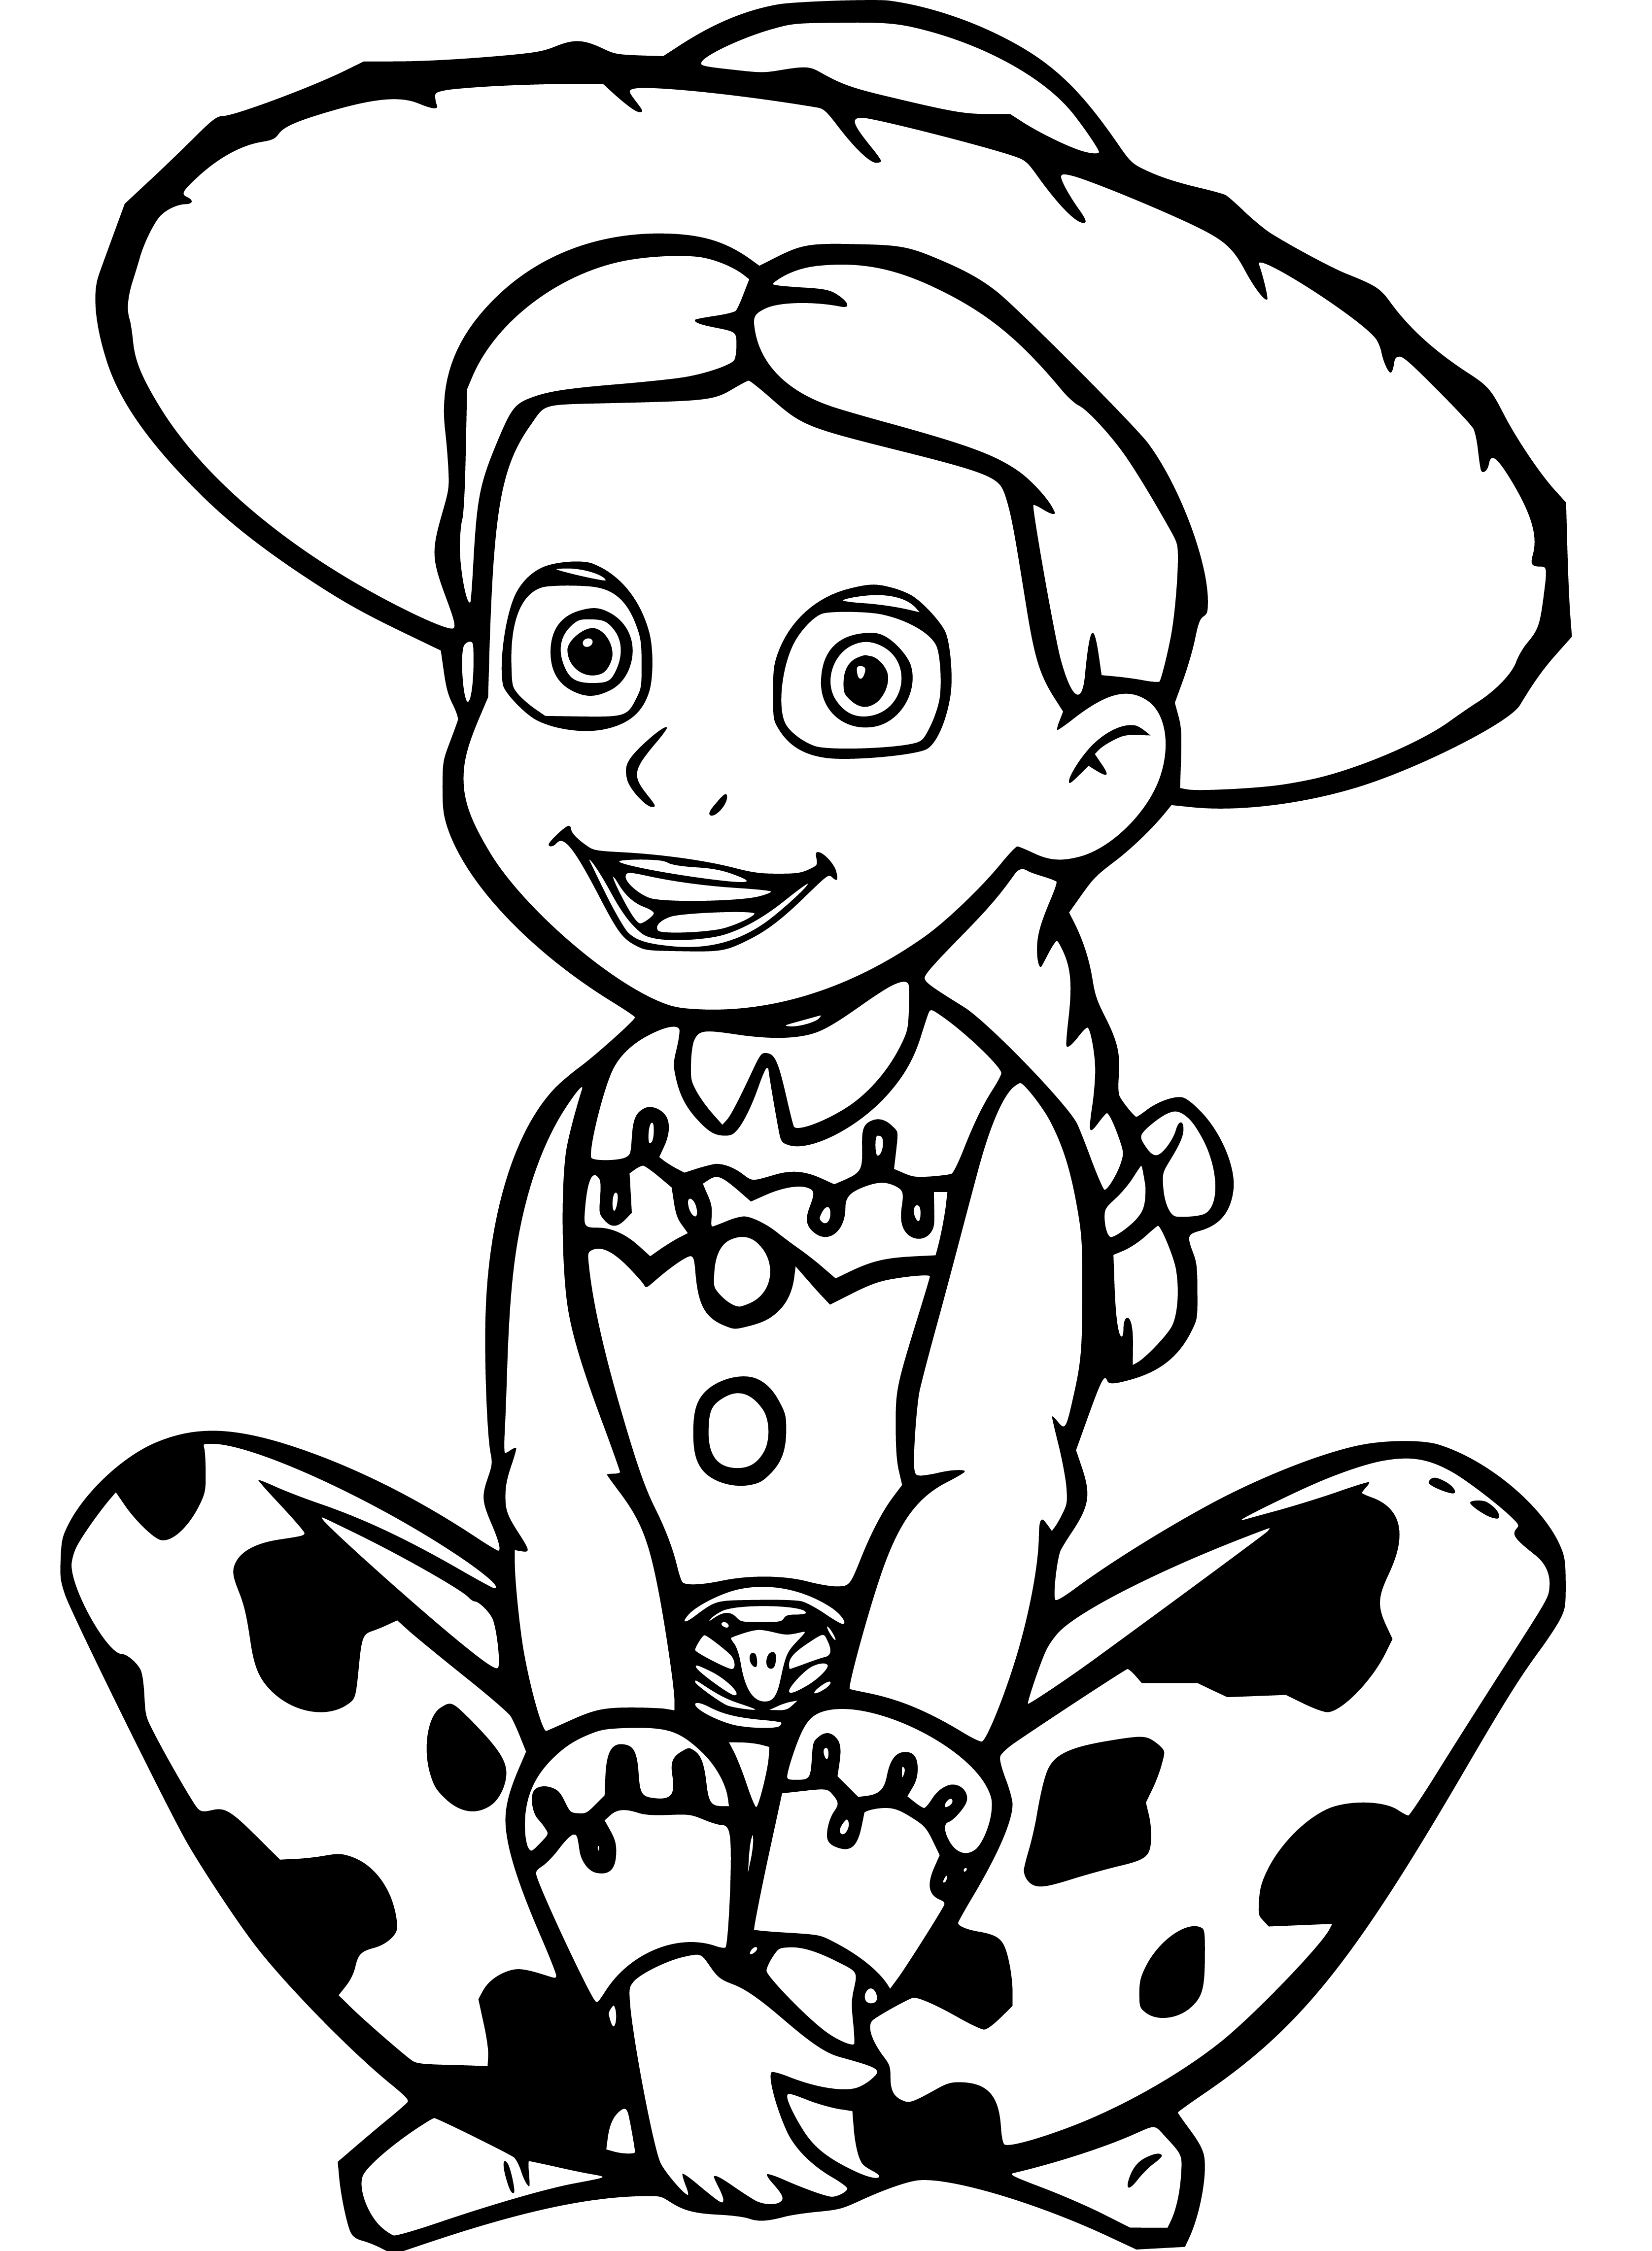 Jessie from Toy Story Coloring Sheet - SheetalColor.com